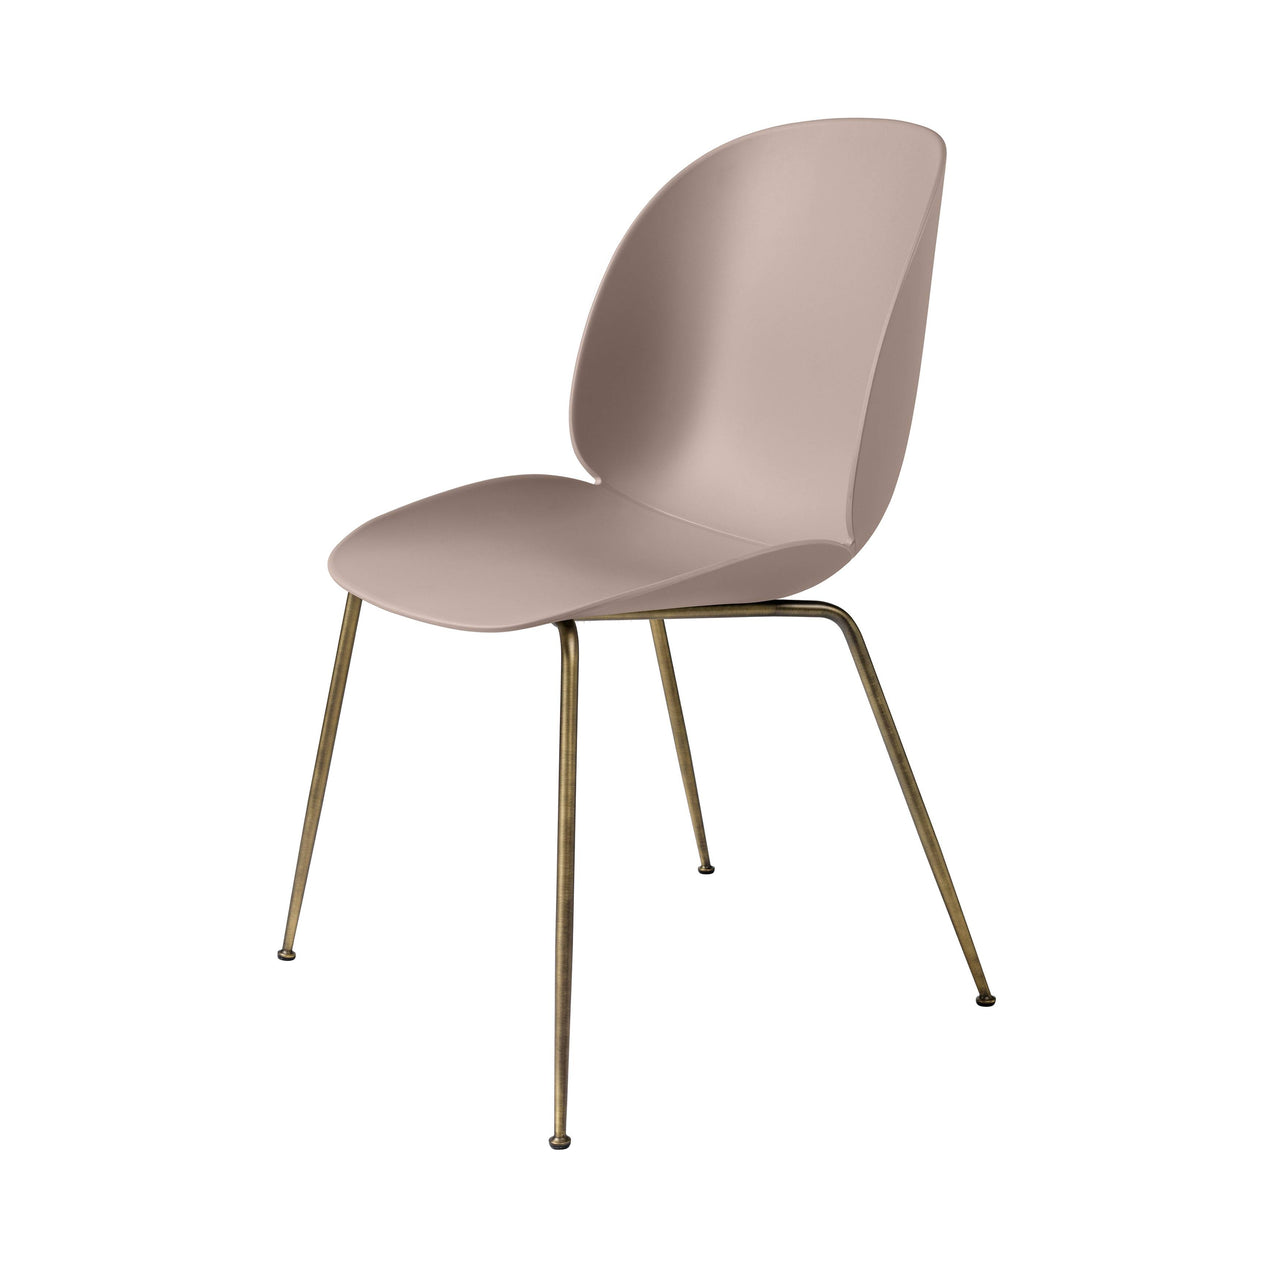 Beetle Dining Chair: Conic Base + Sweet Pink + Antique Brass + Felt Glides